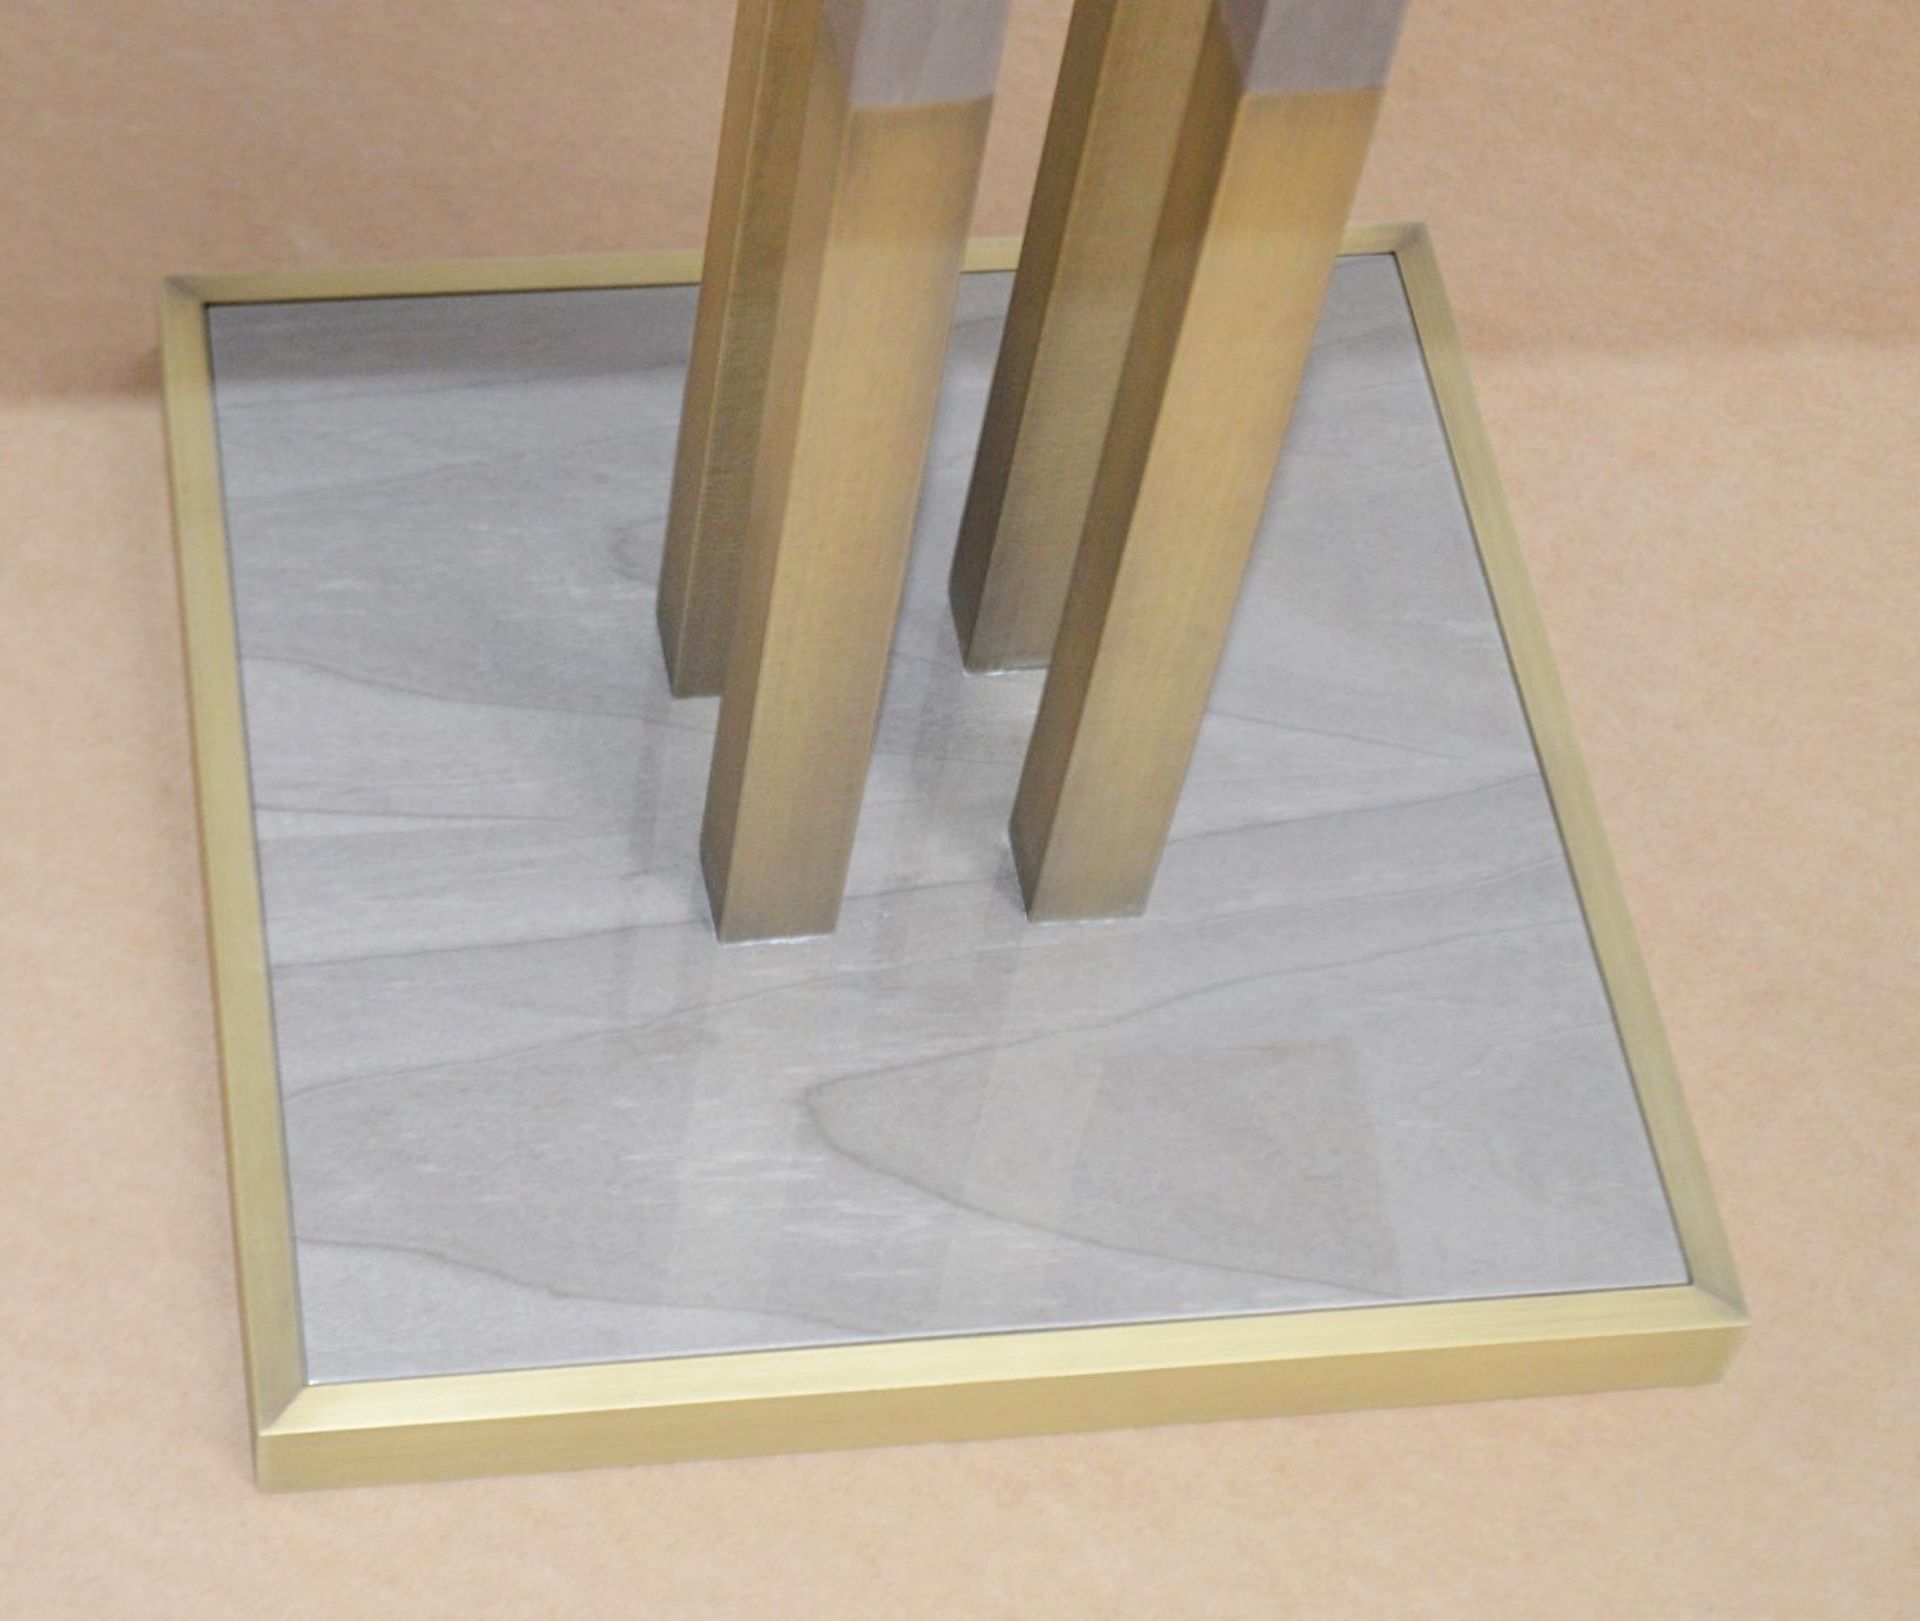 1 x FRATO 'Perth' Luxury Side Table With A Limed Wood / Brushed Brass Finish - Original RRP £1,626 - Image 3 of 5